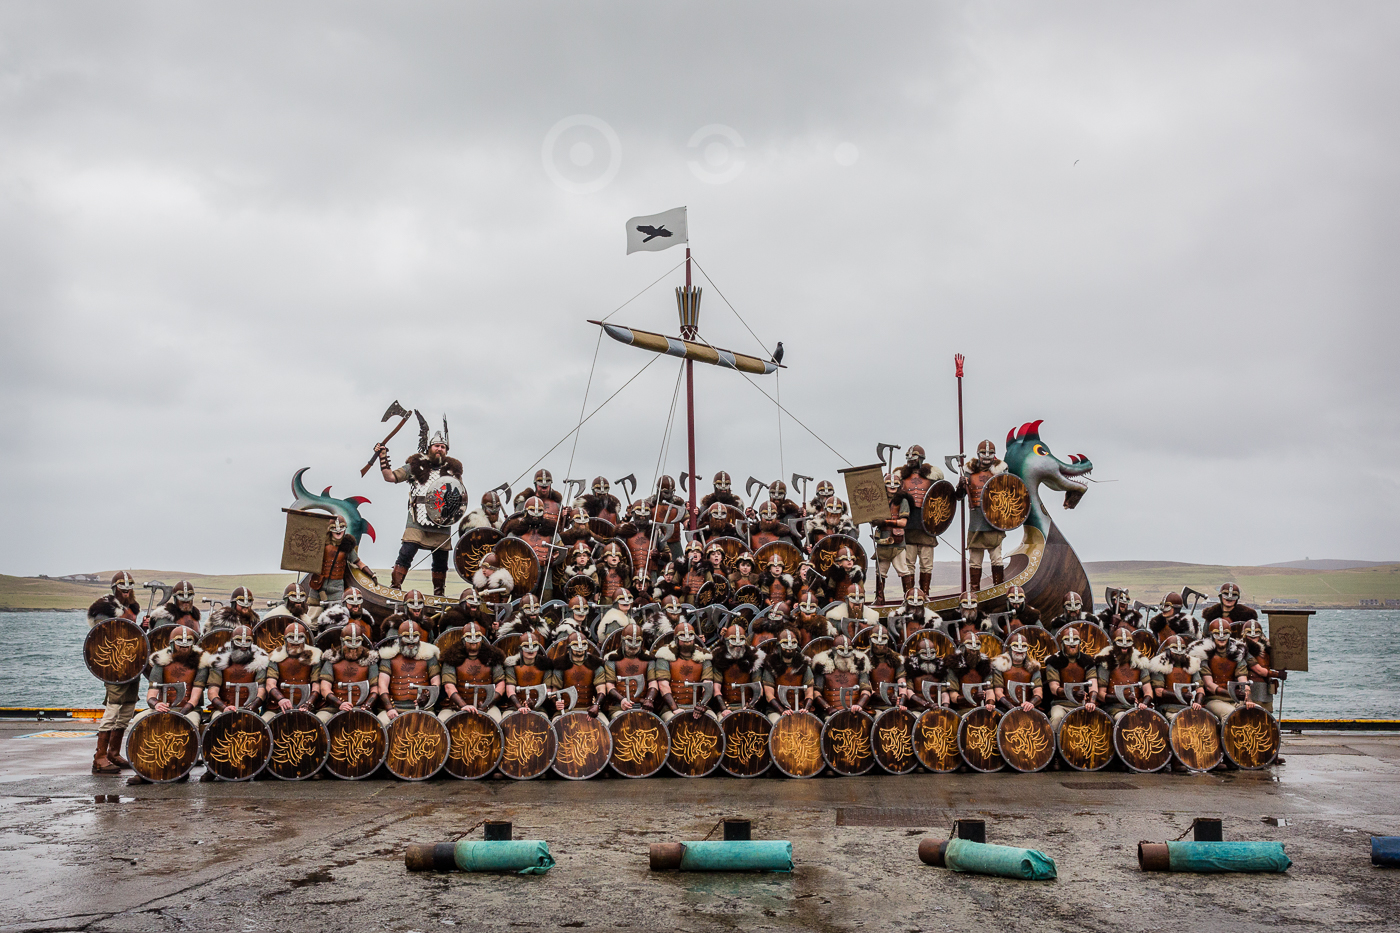 The Jarl's Squad assembled on the galley after the morning procession.